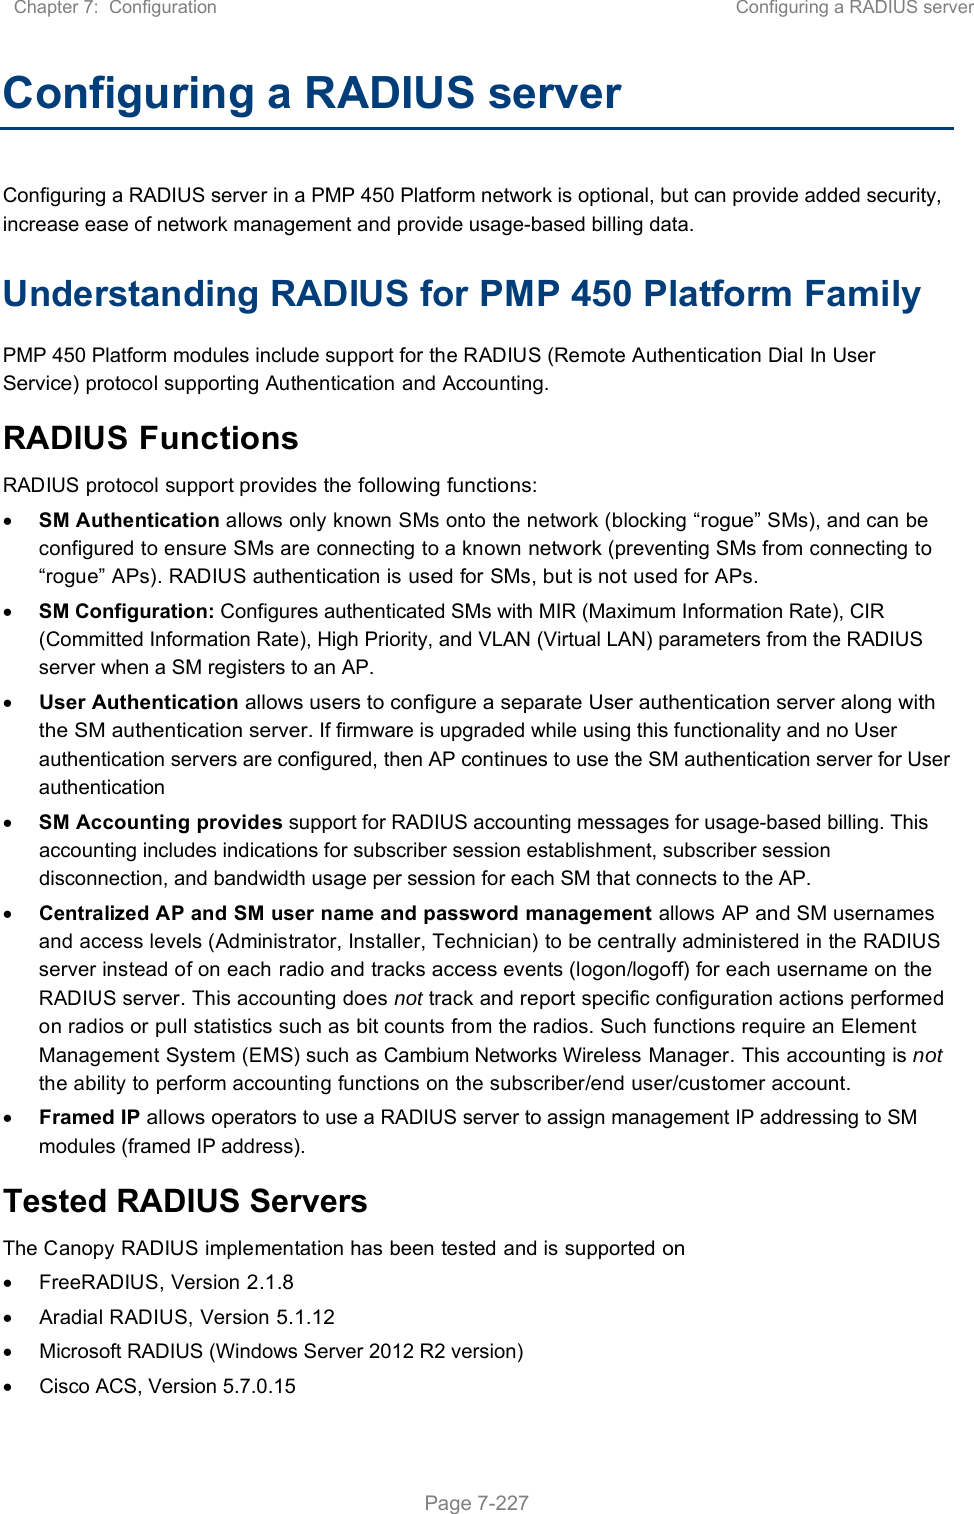 Chapter 7:  Configuration  Configuring a RADIUS server   Page 7-227 Configuring a RADIUS server Configuring a RADIUS server in a PMP 450 Platform network is optional, but can provide added security, increase ease of network management and provide usage-based billing data. Understanding RADIUS for PMP 450 Platform Family PMP 450 Platform modules include support for the RADIUS (Remote Authentication Dial In User Service) protocol supporting Authentication and Accounting. RADIUS Functions RADIUS protocol support provides the following functions:  SM Authentication allows only known SMs onto the network (blocking “rogue” SMs), and can be configured to ensure SMs are connecting to a known network (preventing SMs from connecting to “rogue” APs). RADIUS authentication is used for SMs, but is not used for APs.  SM Configuration: Configures authenticated SMs with MIR (Maximum Information Rate), CIR (Committed Information Rate), High Priority, and VLAN (Virtual LAN) parameters from the RADIUS server when a SM registers to an AP.   User Authentication allows users to configure a separate User authentication server along with the SM authentication server. If firmware is upgraded while using this functionality and no User authentication servers are configured, then AP continues to use the SM authentication server for User authentication  SM Accounting provides support for RADIUS accounting messages for usage-based billing. This accounting includes indications for subscriber session establishment, subscriber session disconnection, and bandwidth usage per session for each SM that connects to the AP.   Centralized AP and SM user name and password management allows AP and SM usernames and access levels (Administrator, Installer, Technician) to be centrally administered in the RADIUS server instead of on each radio and tracks access events (logon/logoff) for each username on the RADIUS server. This accounting does not track and report specific configuration actions performed on radios or pull statistics such as bit counts from the radios. Such functions require an Element Management System (EMS) such as Cambium Networks Wireless Manager. This accounting is not the ability to perform accounting functions on the subscriber/end user/customer account.  Framed IP allows operators to use a RADIUS server to assign management IP addressing to SM modules (framed IP address). Tested RADIUS Servers The Canopy RADIUS implementation has been tested and is supported on   FreeRADIUS, Version 2.1.8   Aradial RADIUS, Version 5.1.12   Microsoft RADIUS (Windows Server 2012 R2 version)    Cisco ACS, Version 5.7.0.15  